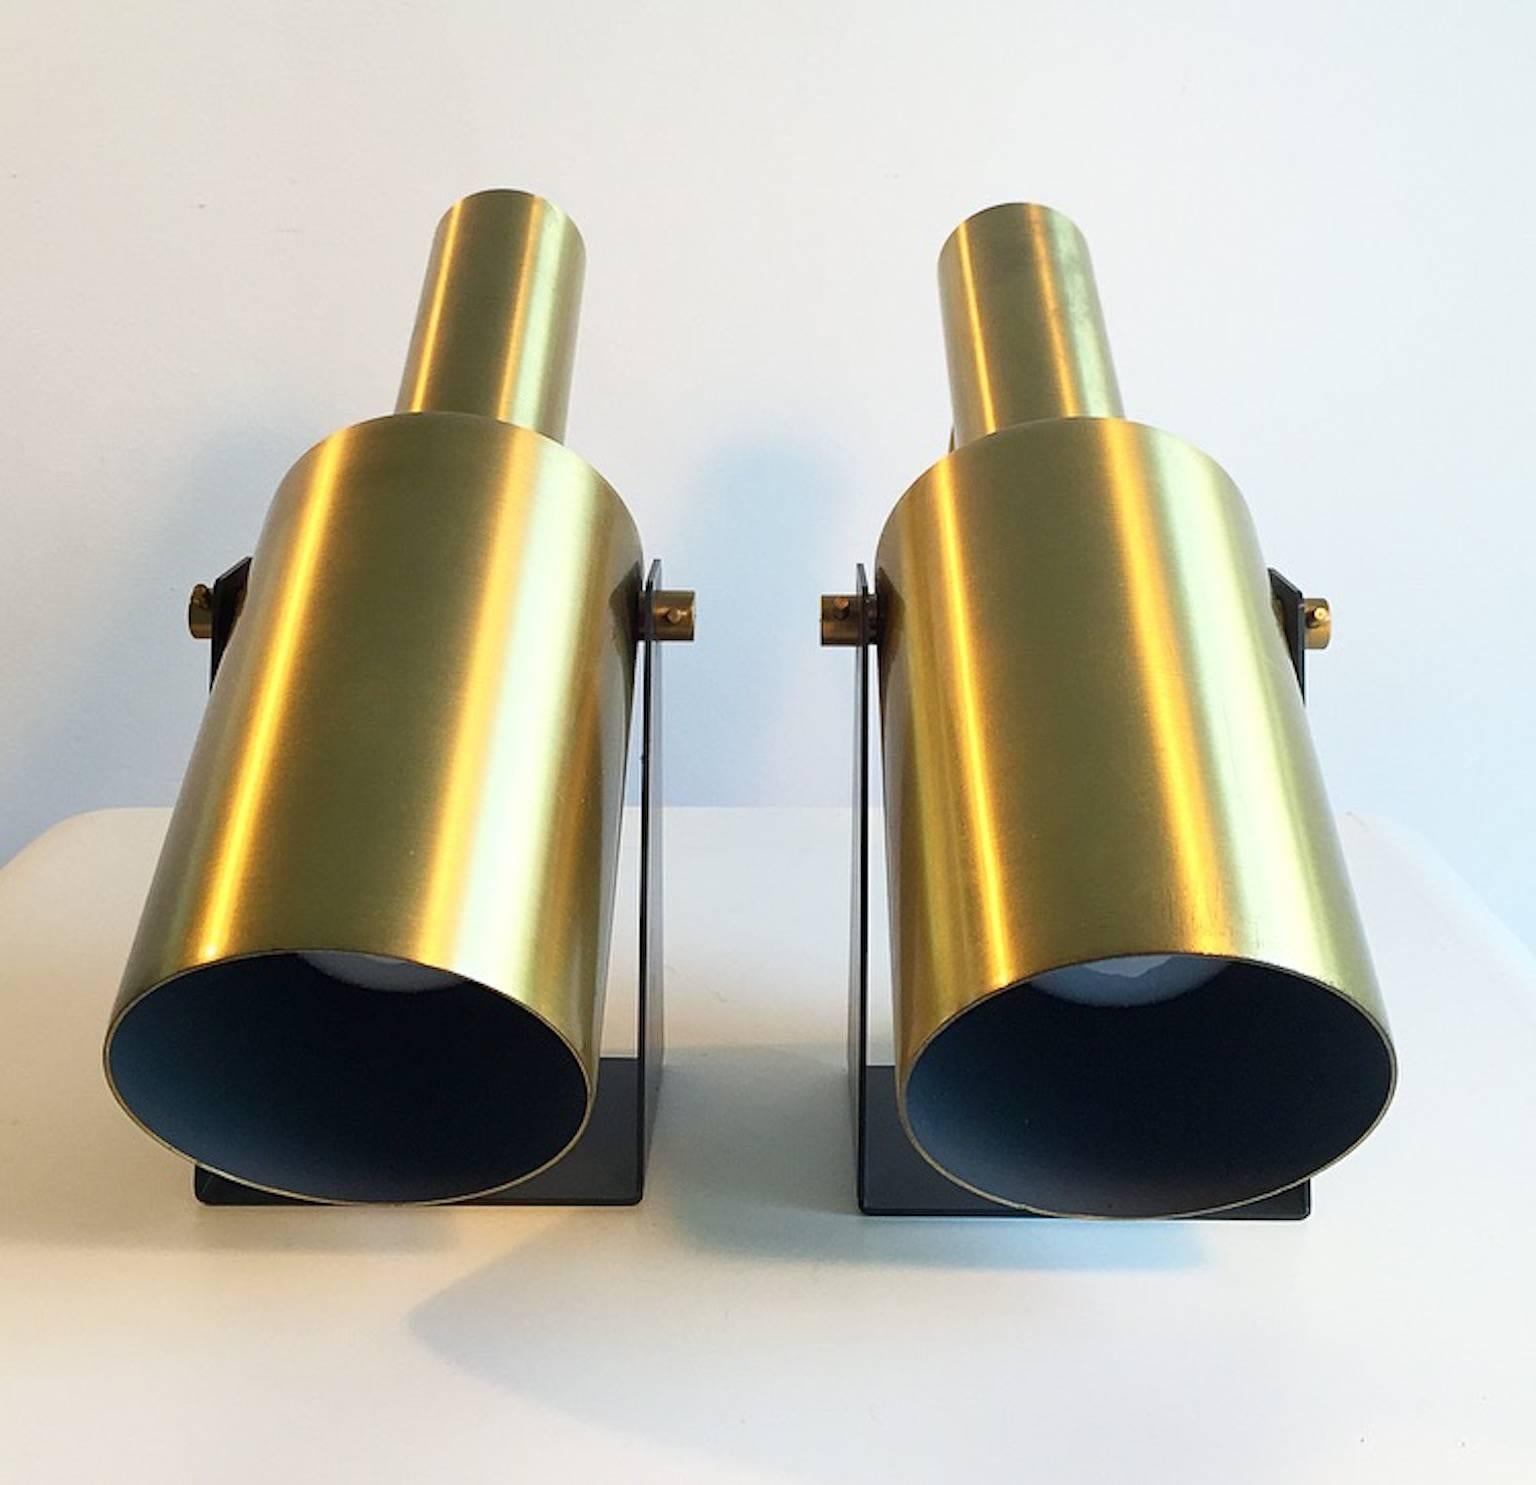 A very rare find: A pair of iconic brass wall sconces designed by Danish Hans Per Jeppesen in 1968 for the well-known manufacturer Fog & Mørup.

The lamps are very high-built quality with shades of brass and even the wall fixture and screws are